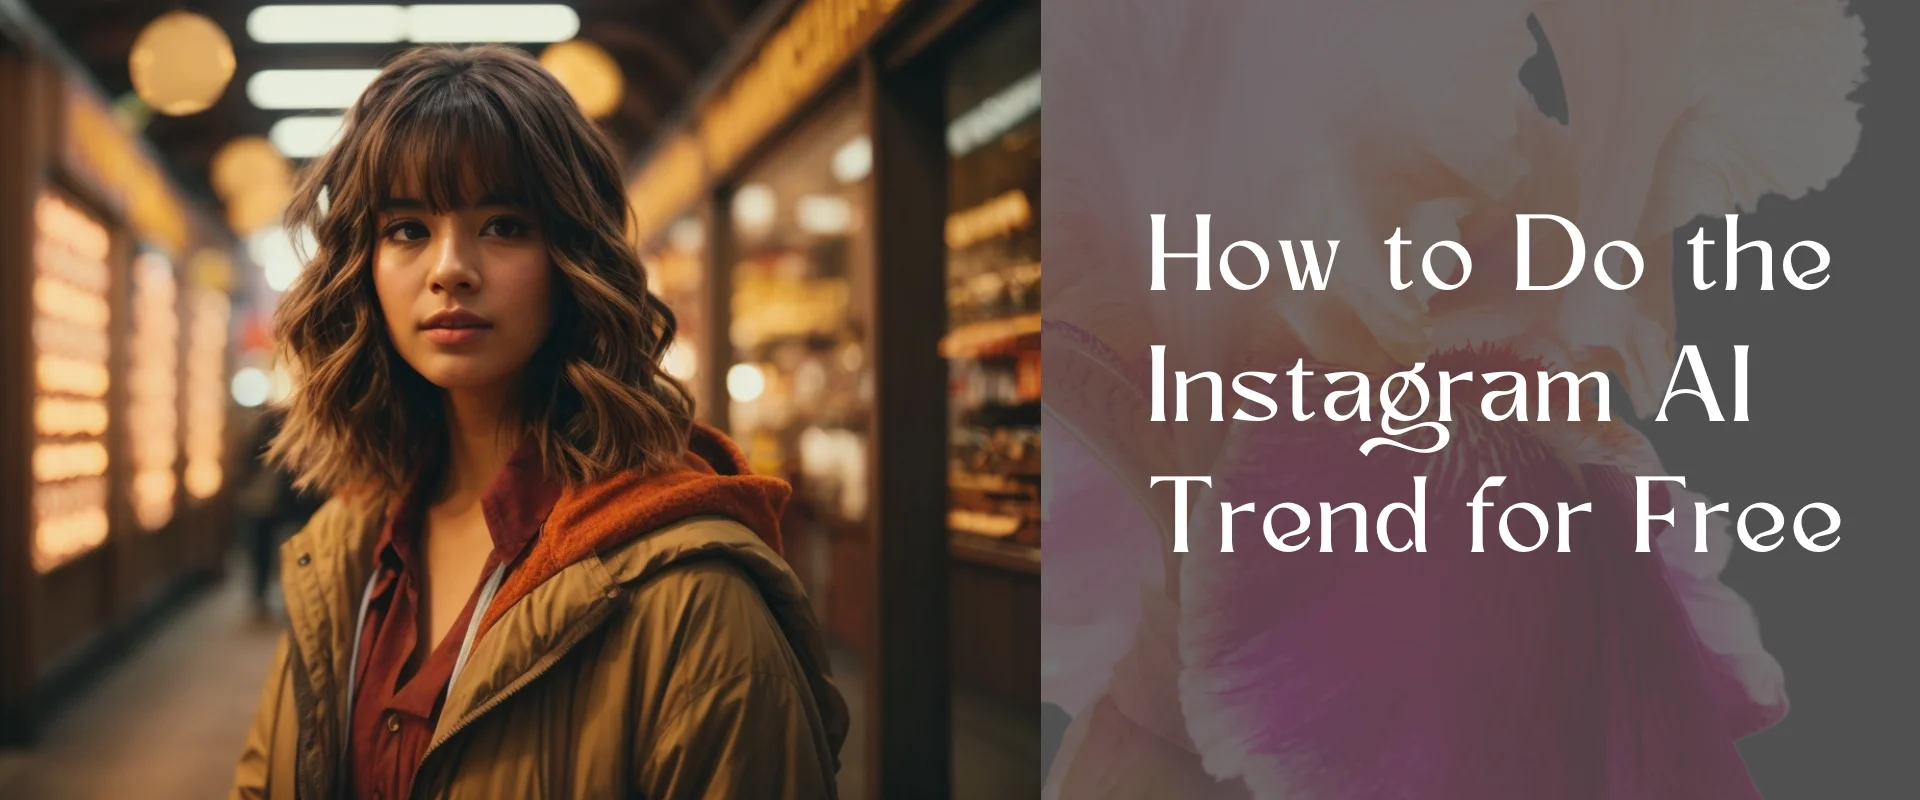 How to Do the Instagram AI Trend for Free (Quick Guide)